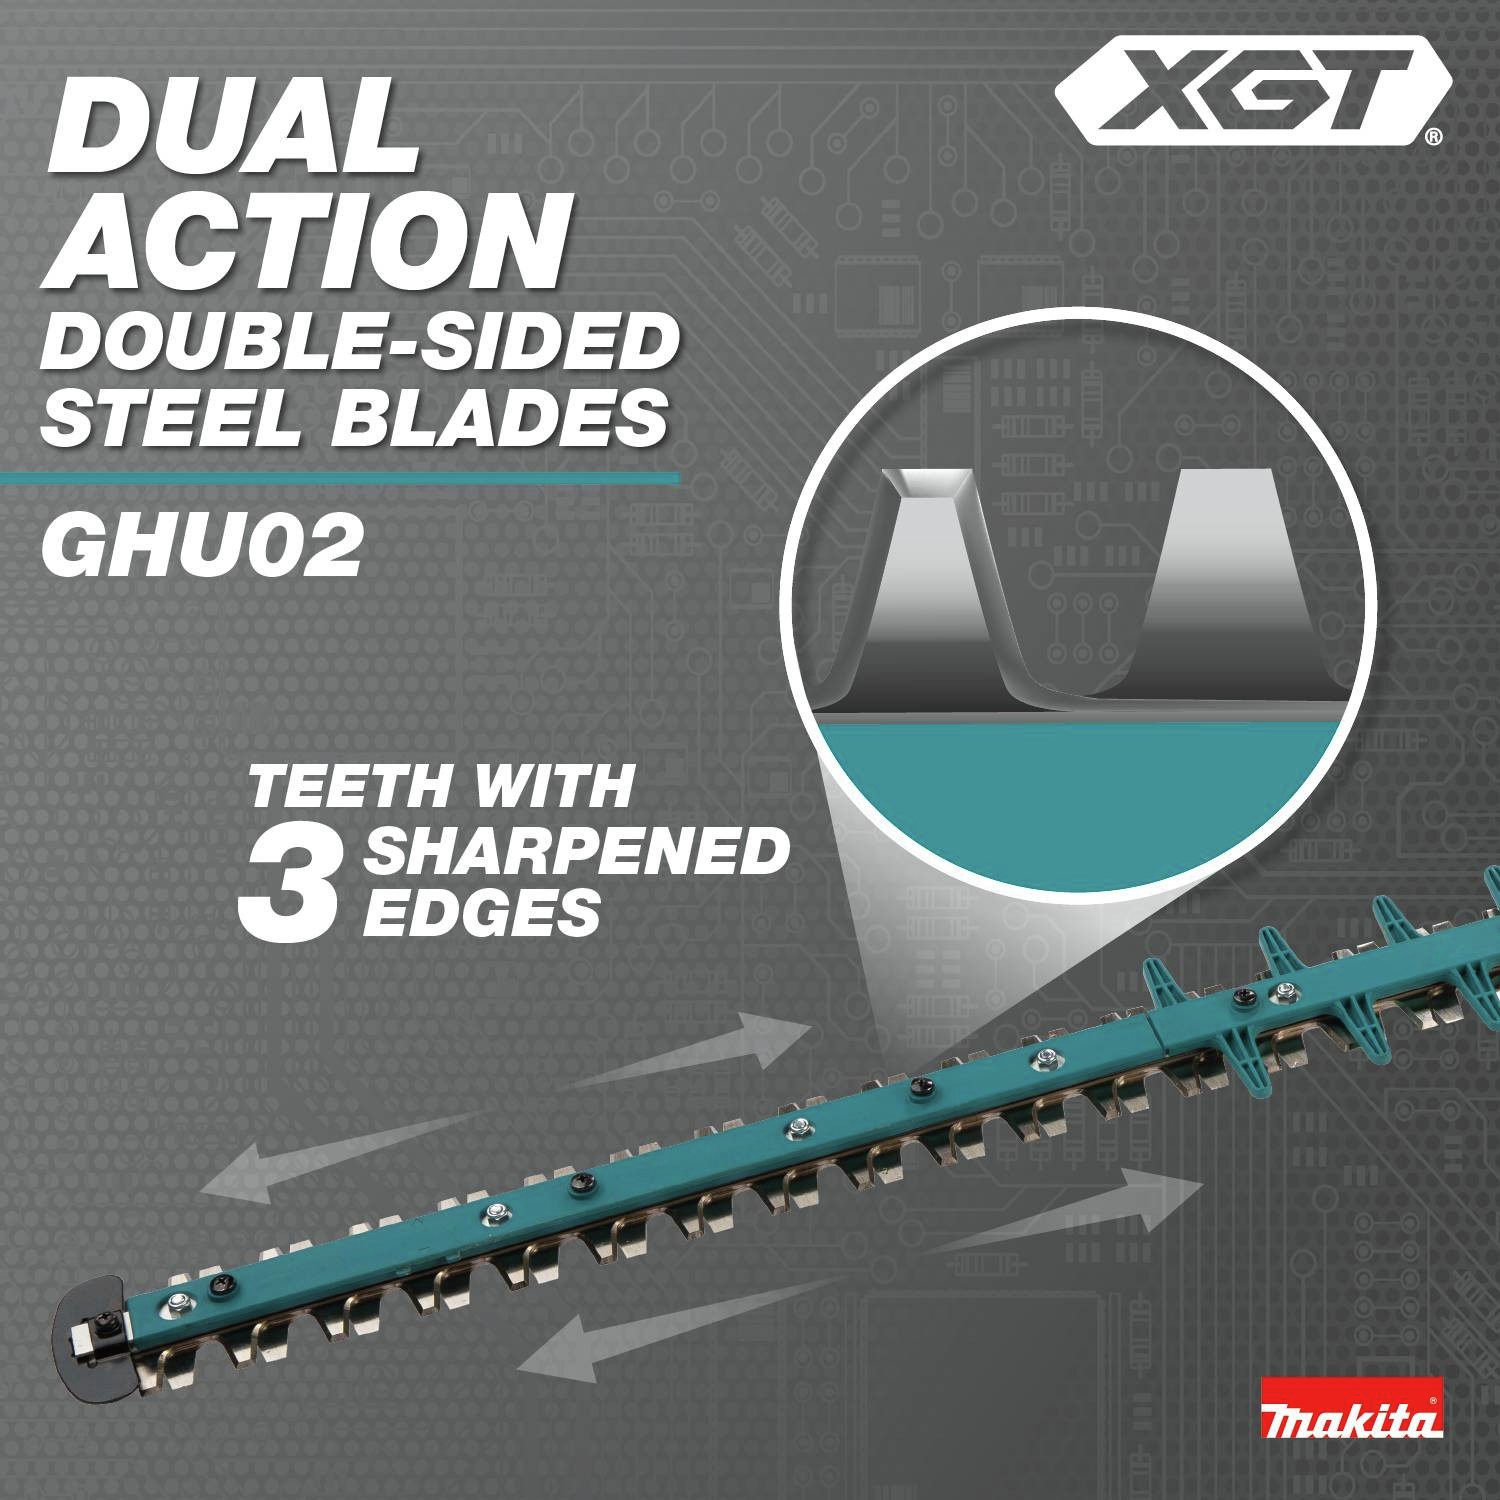 Dual Action, Double-Sided Steel Blades: Teeth with 3 sharpened edges